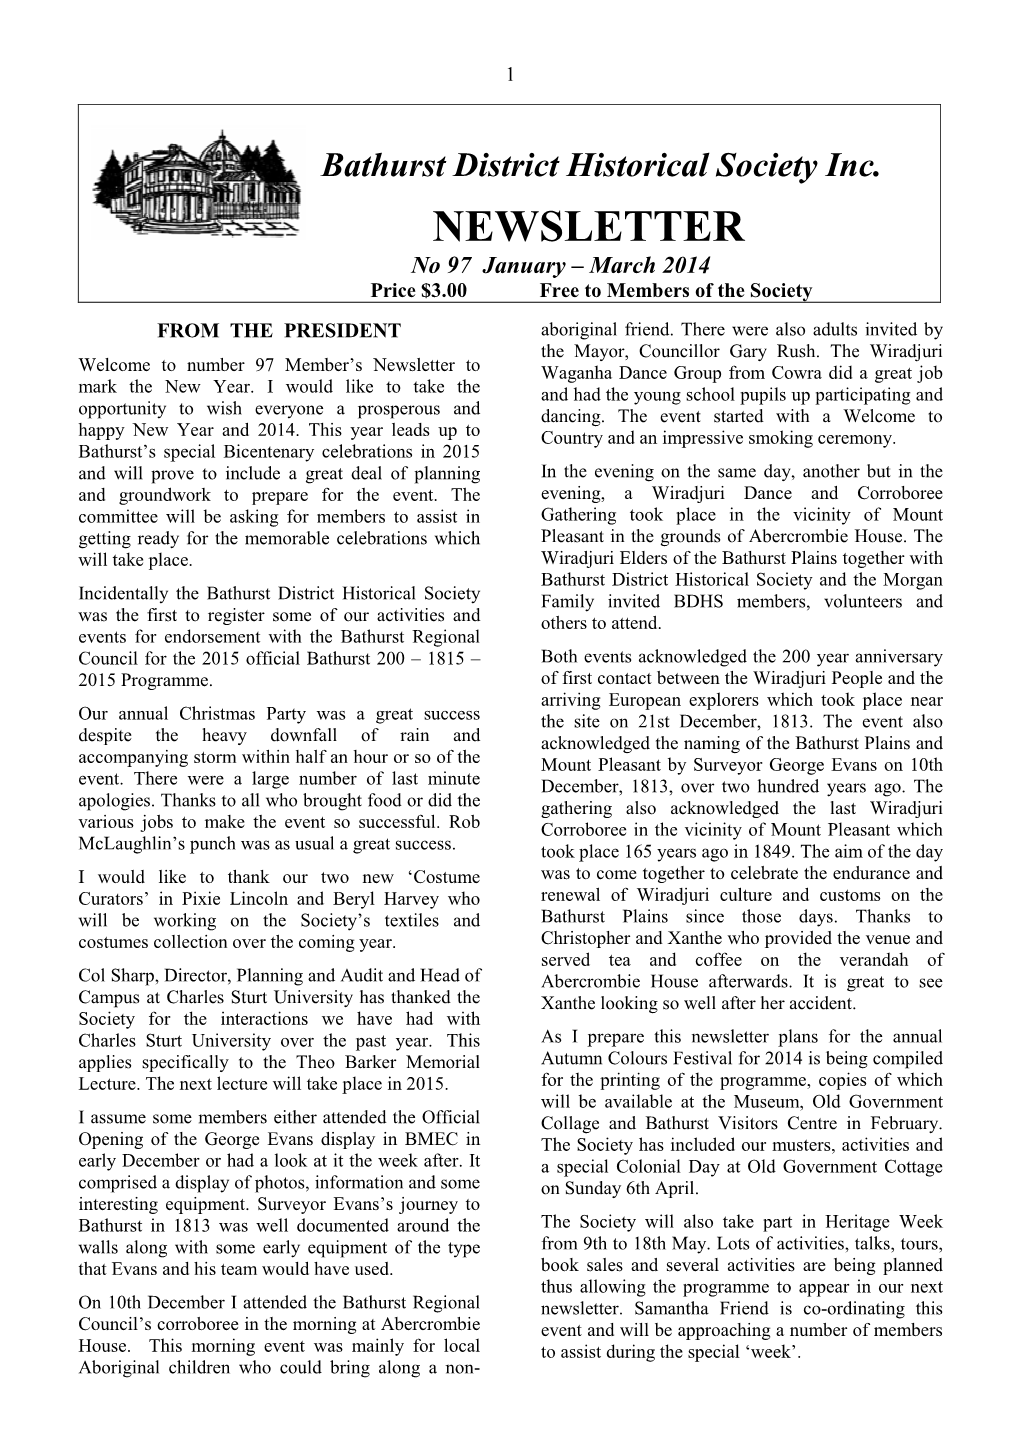 NEWSLETTER No 97 January – March 2014 Price $3.00 Free to Members of the Society